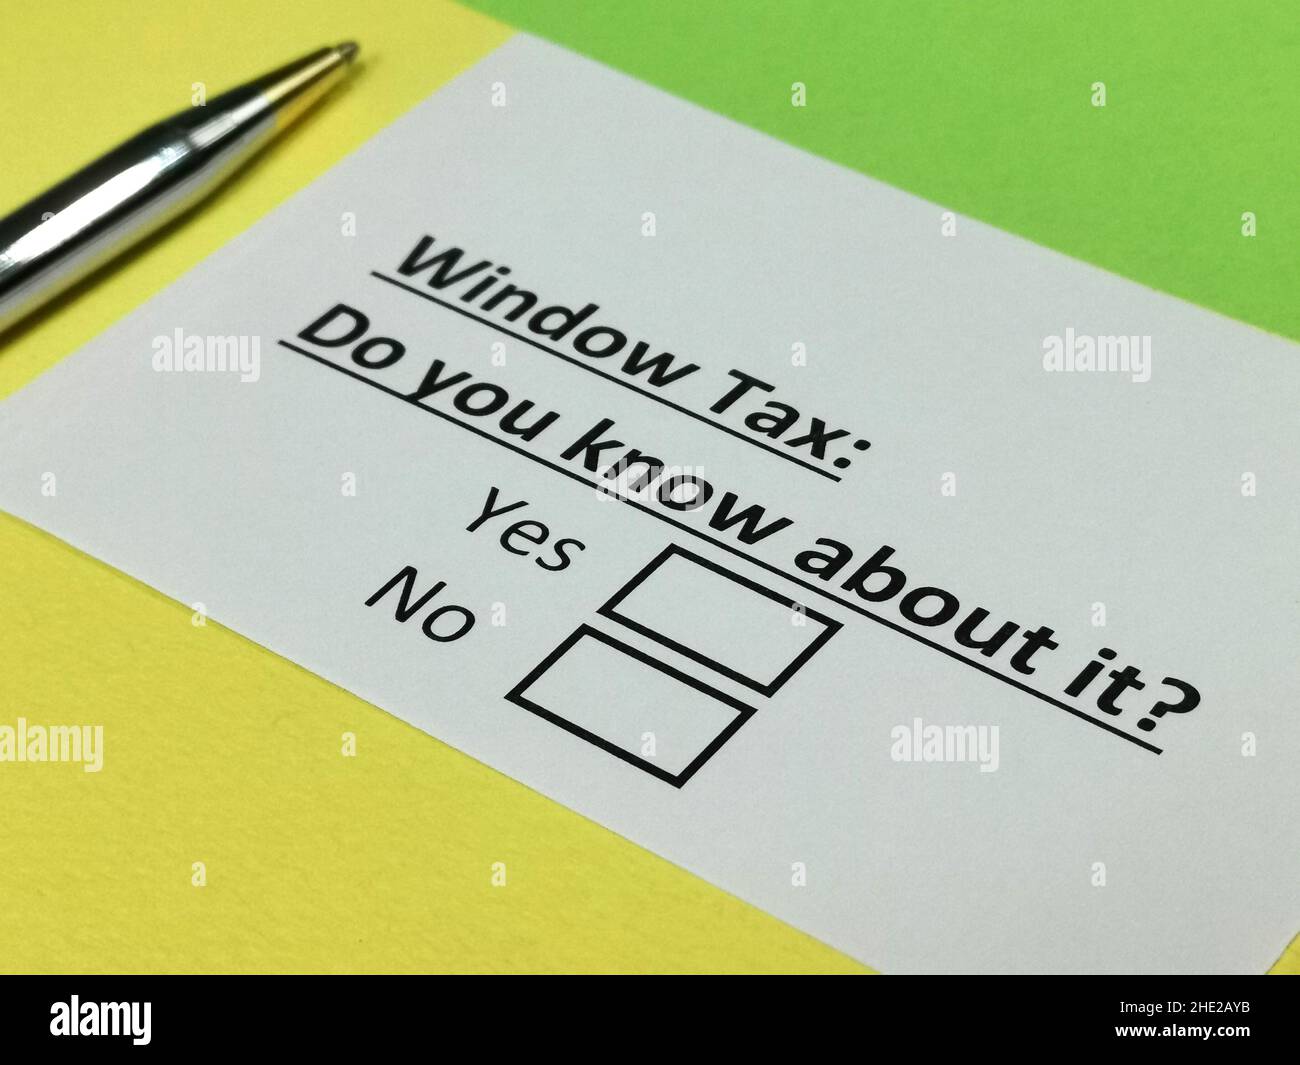 One person is answering question about window tax. Stock Photo